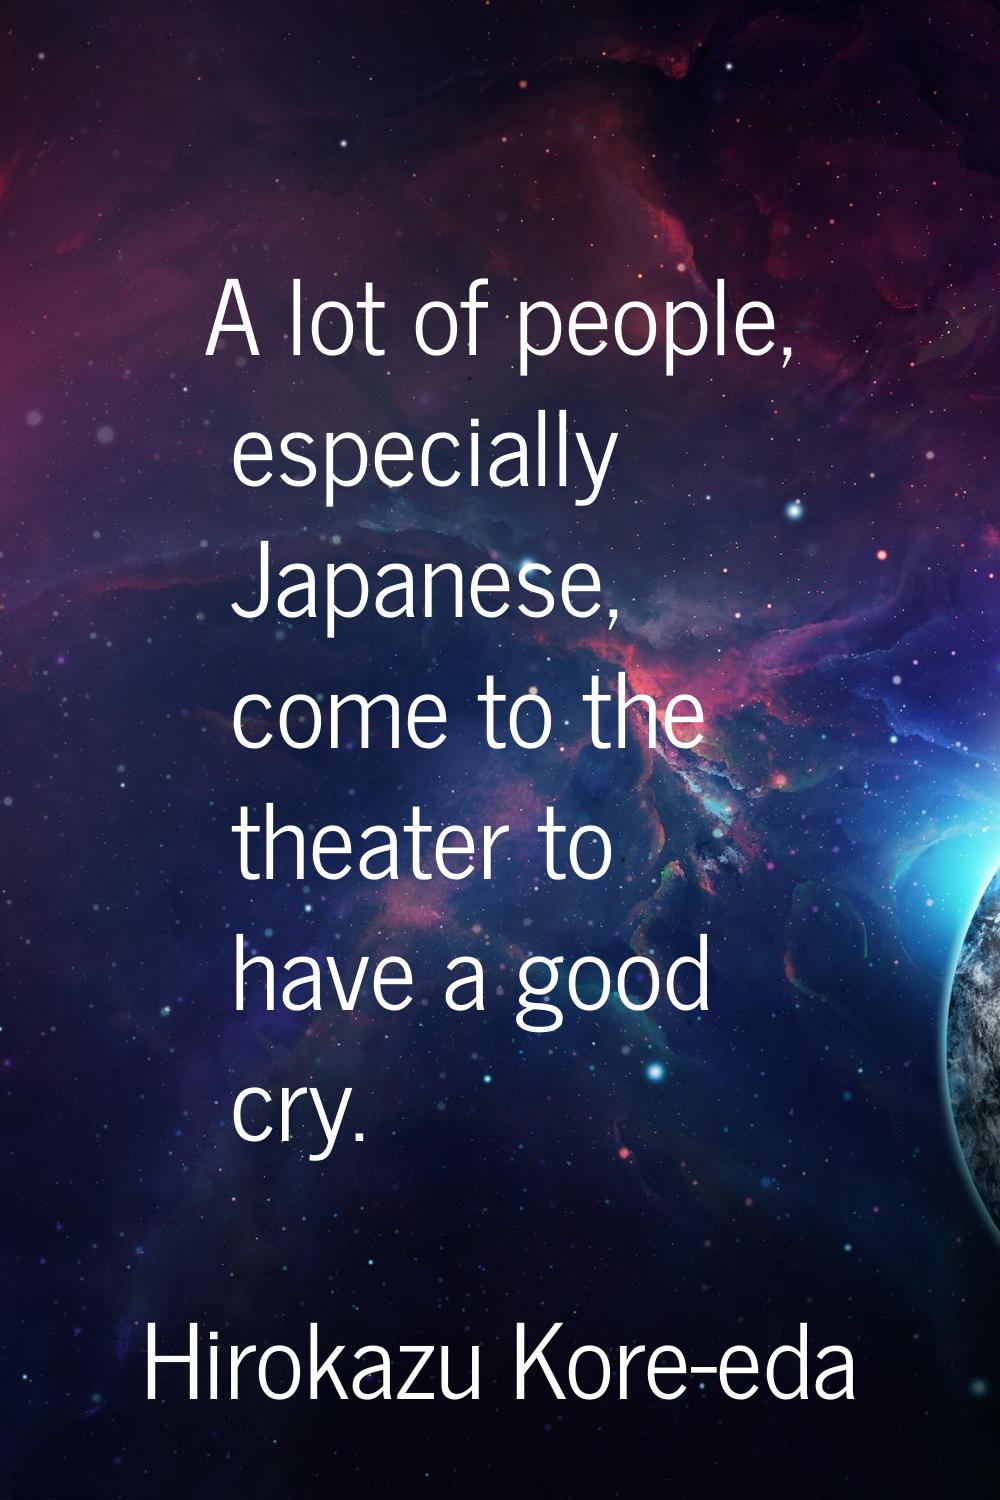 A lot of people, especially Japanese, come to the theater to have a good cry.